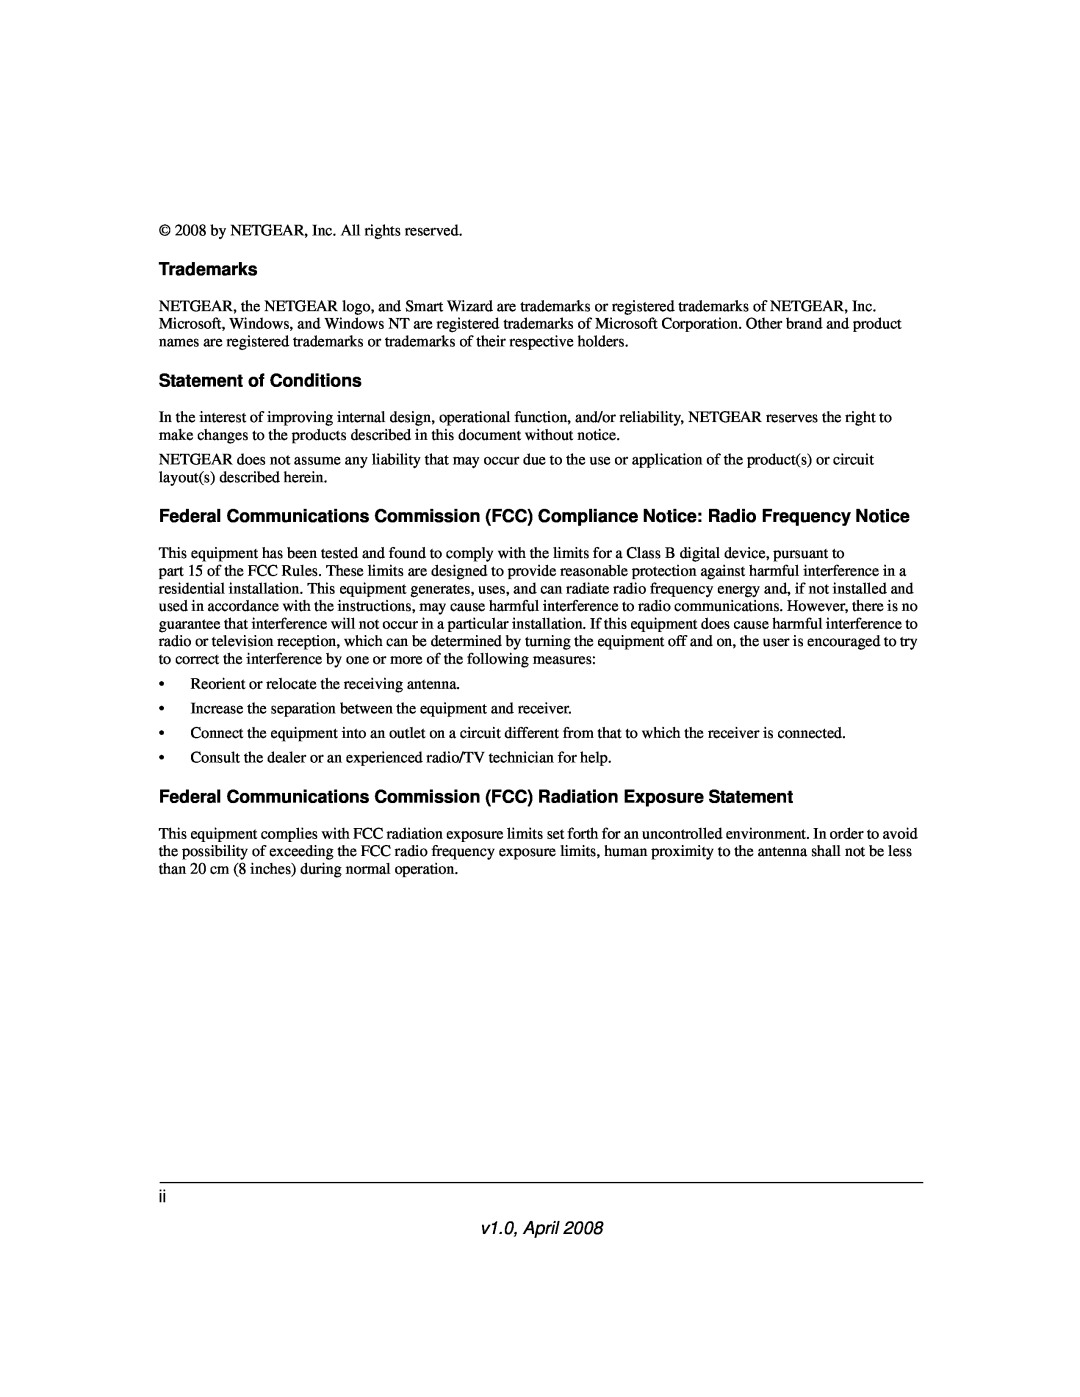 NETGEAR ADSL2+ Trademarks, Statement of Conditions, Federal Communications Commission FCC Radiation Exposure Statement 